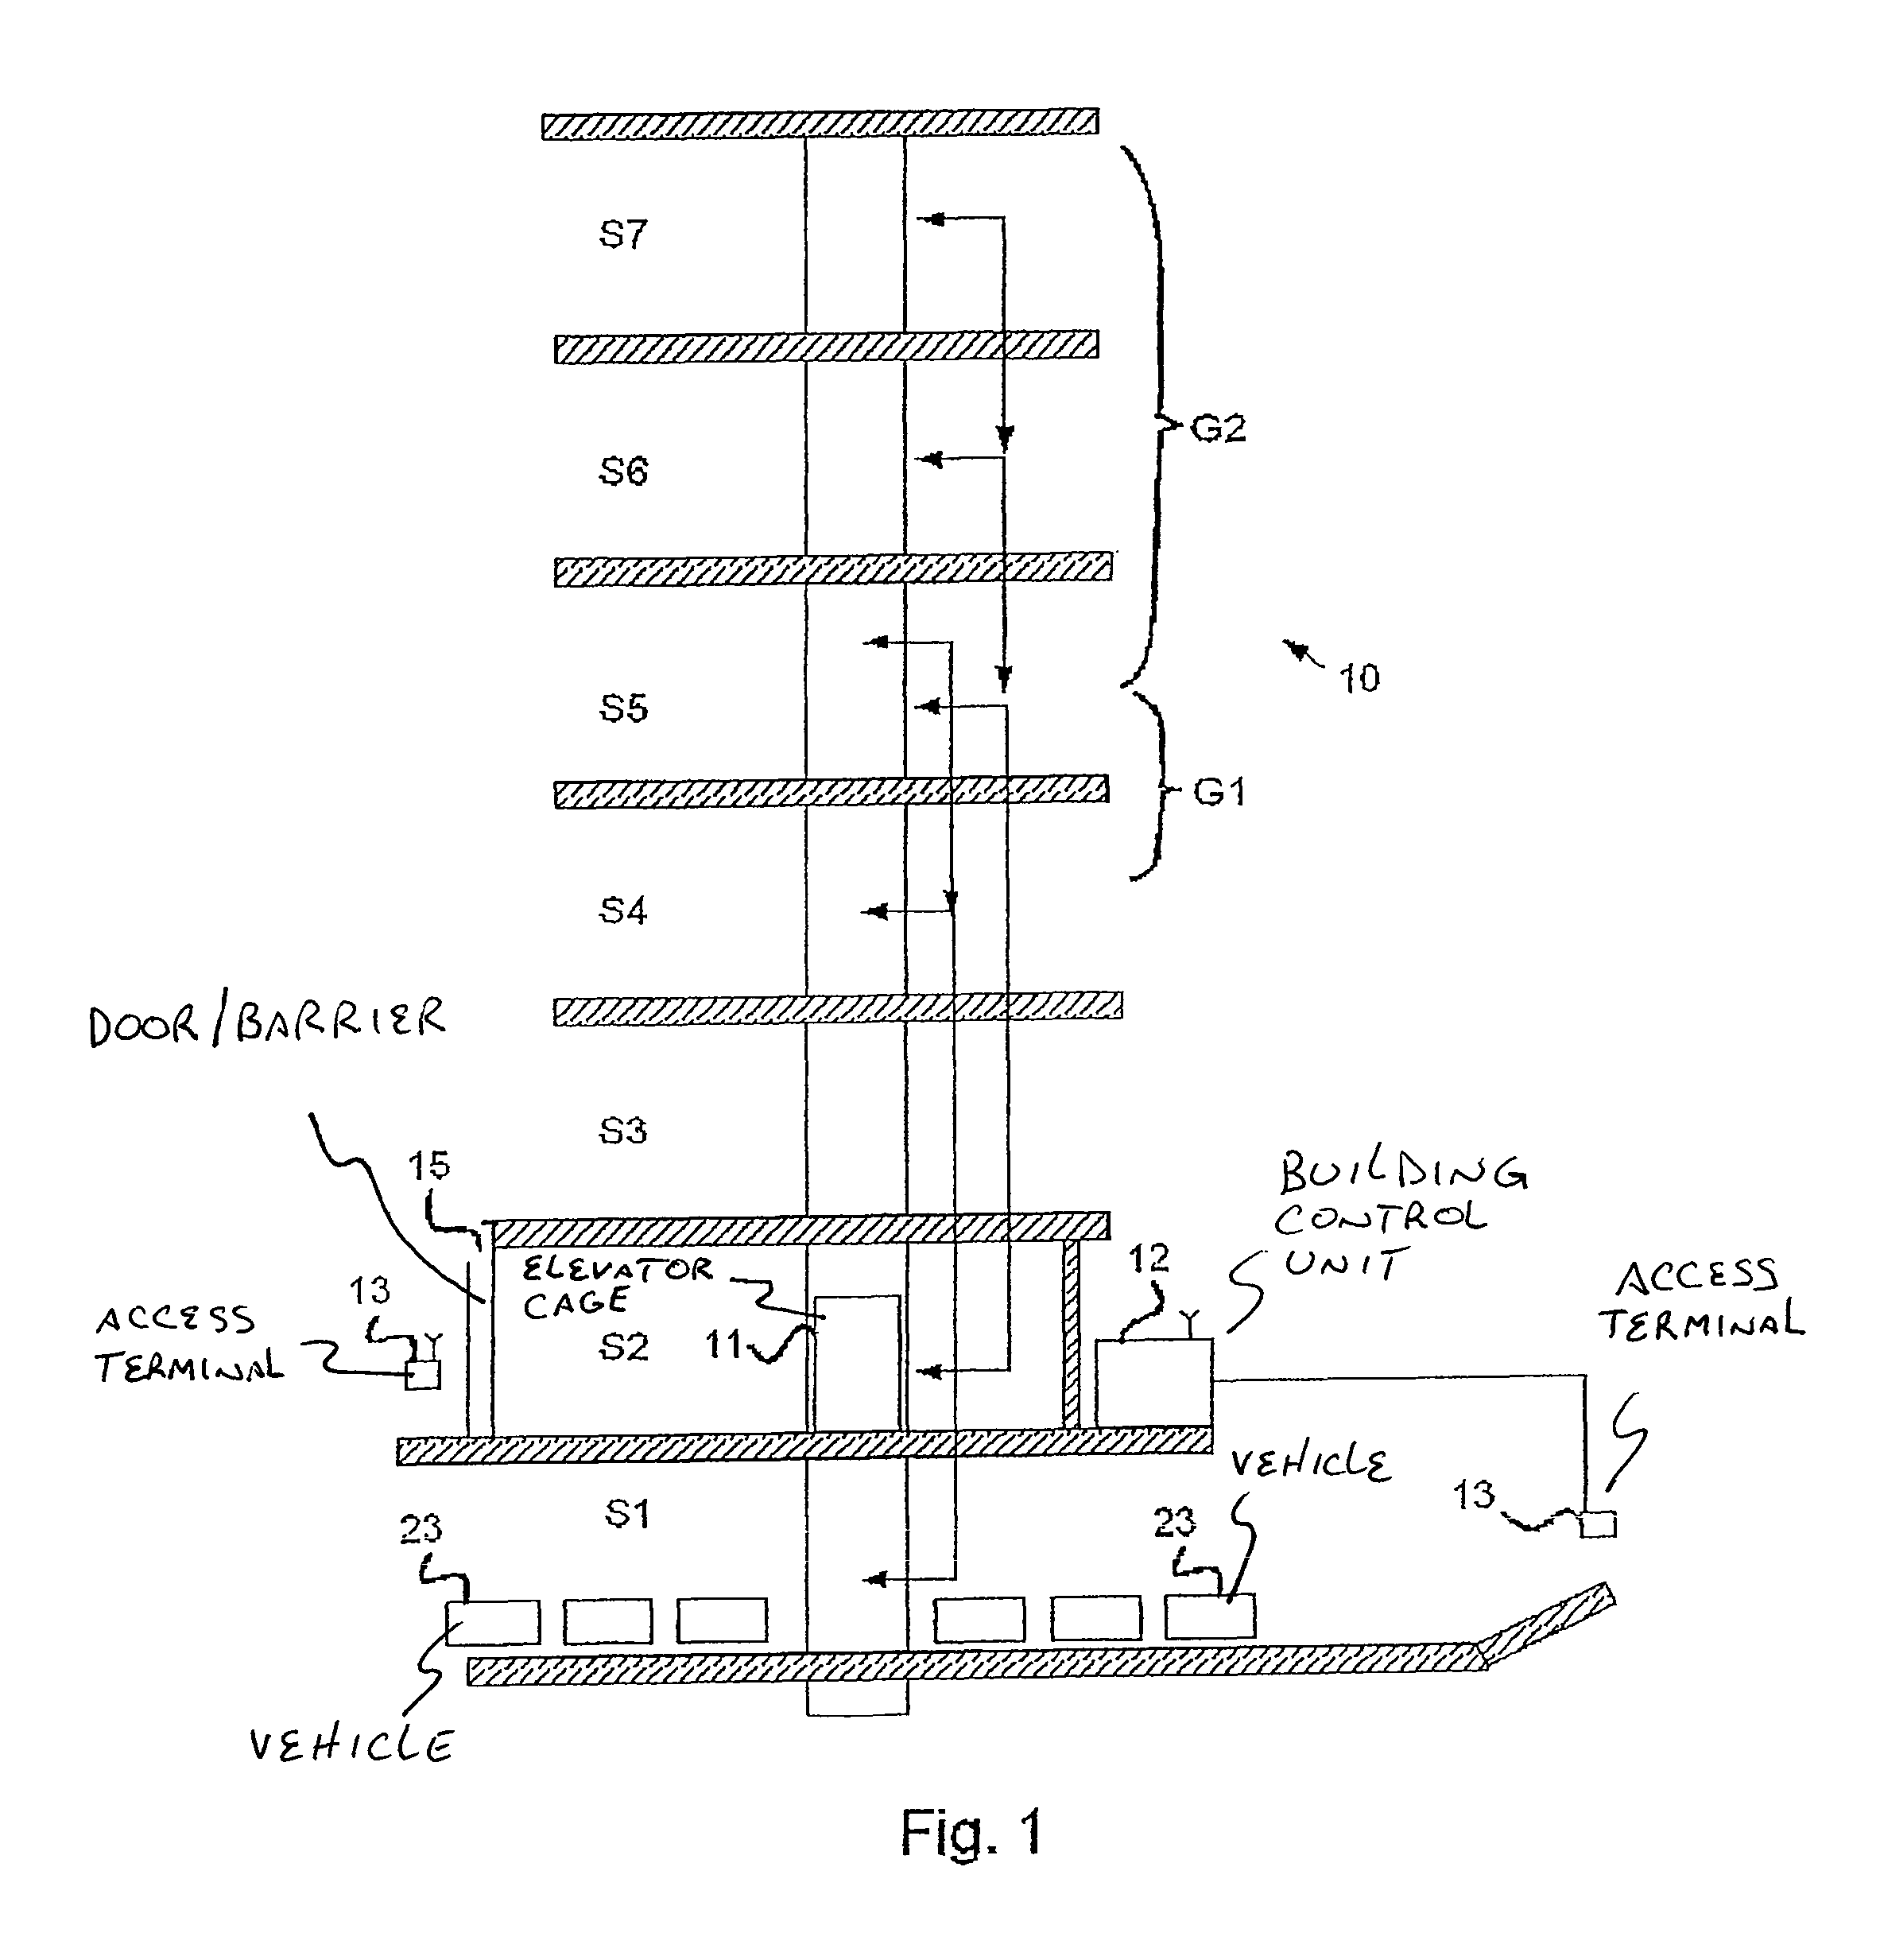 System and method for determining a destination story based on movement direction of a person on an access story